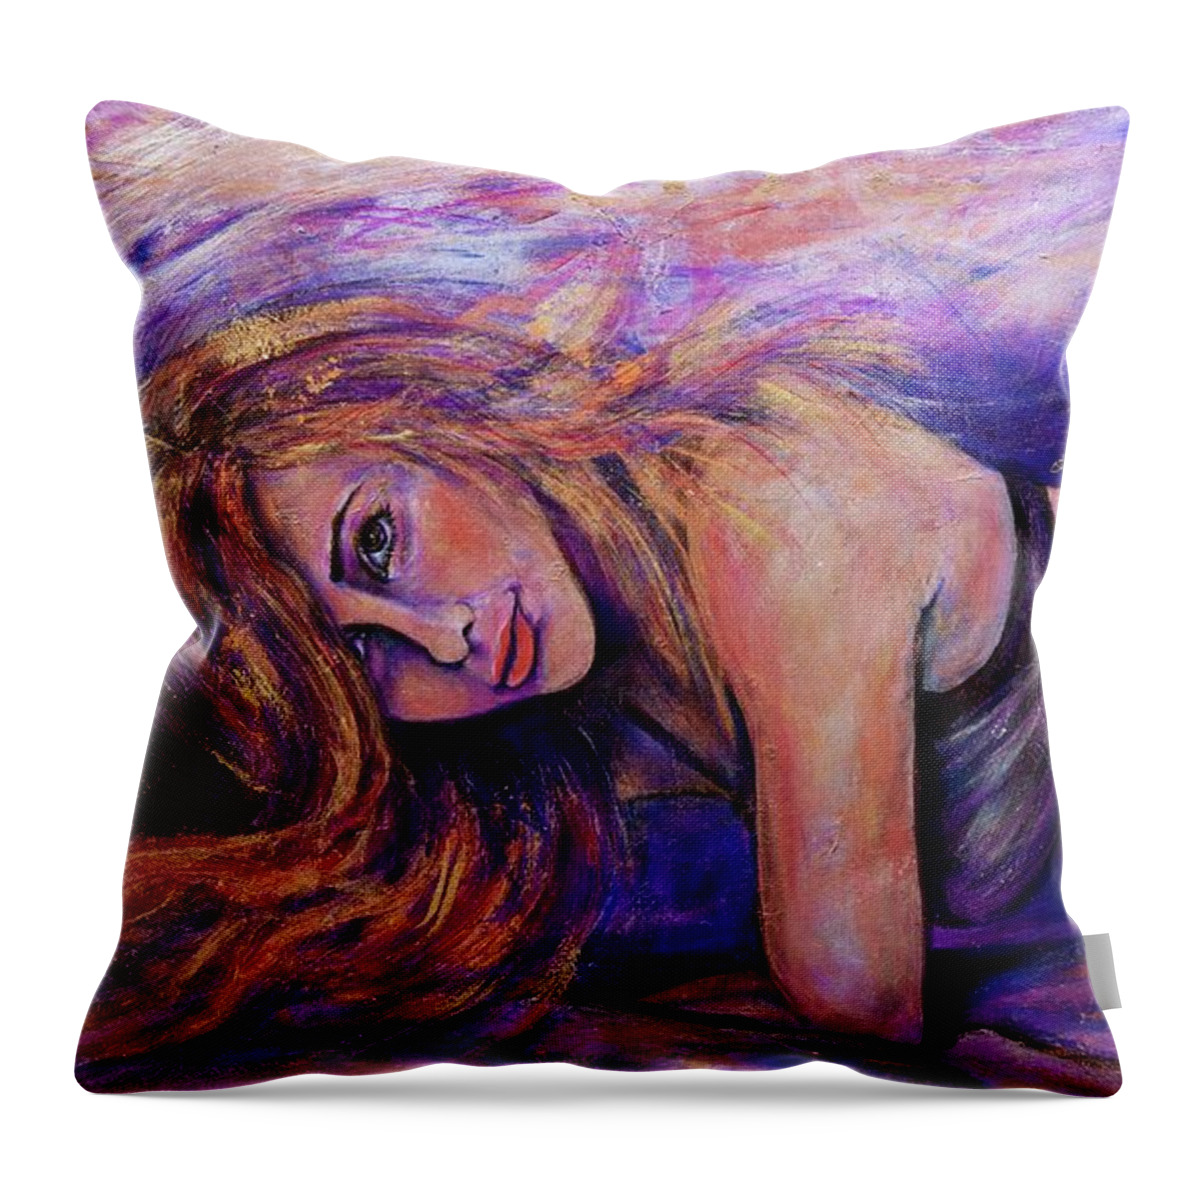 Precious Metals Throw Pillow featuring the painting Precious Metals X by Debi Starr